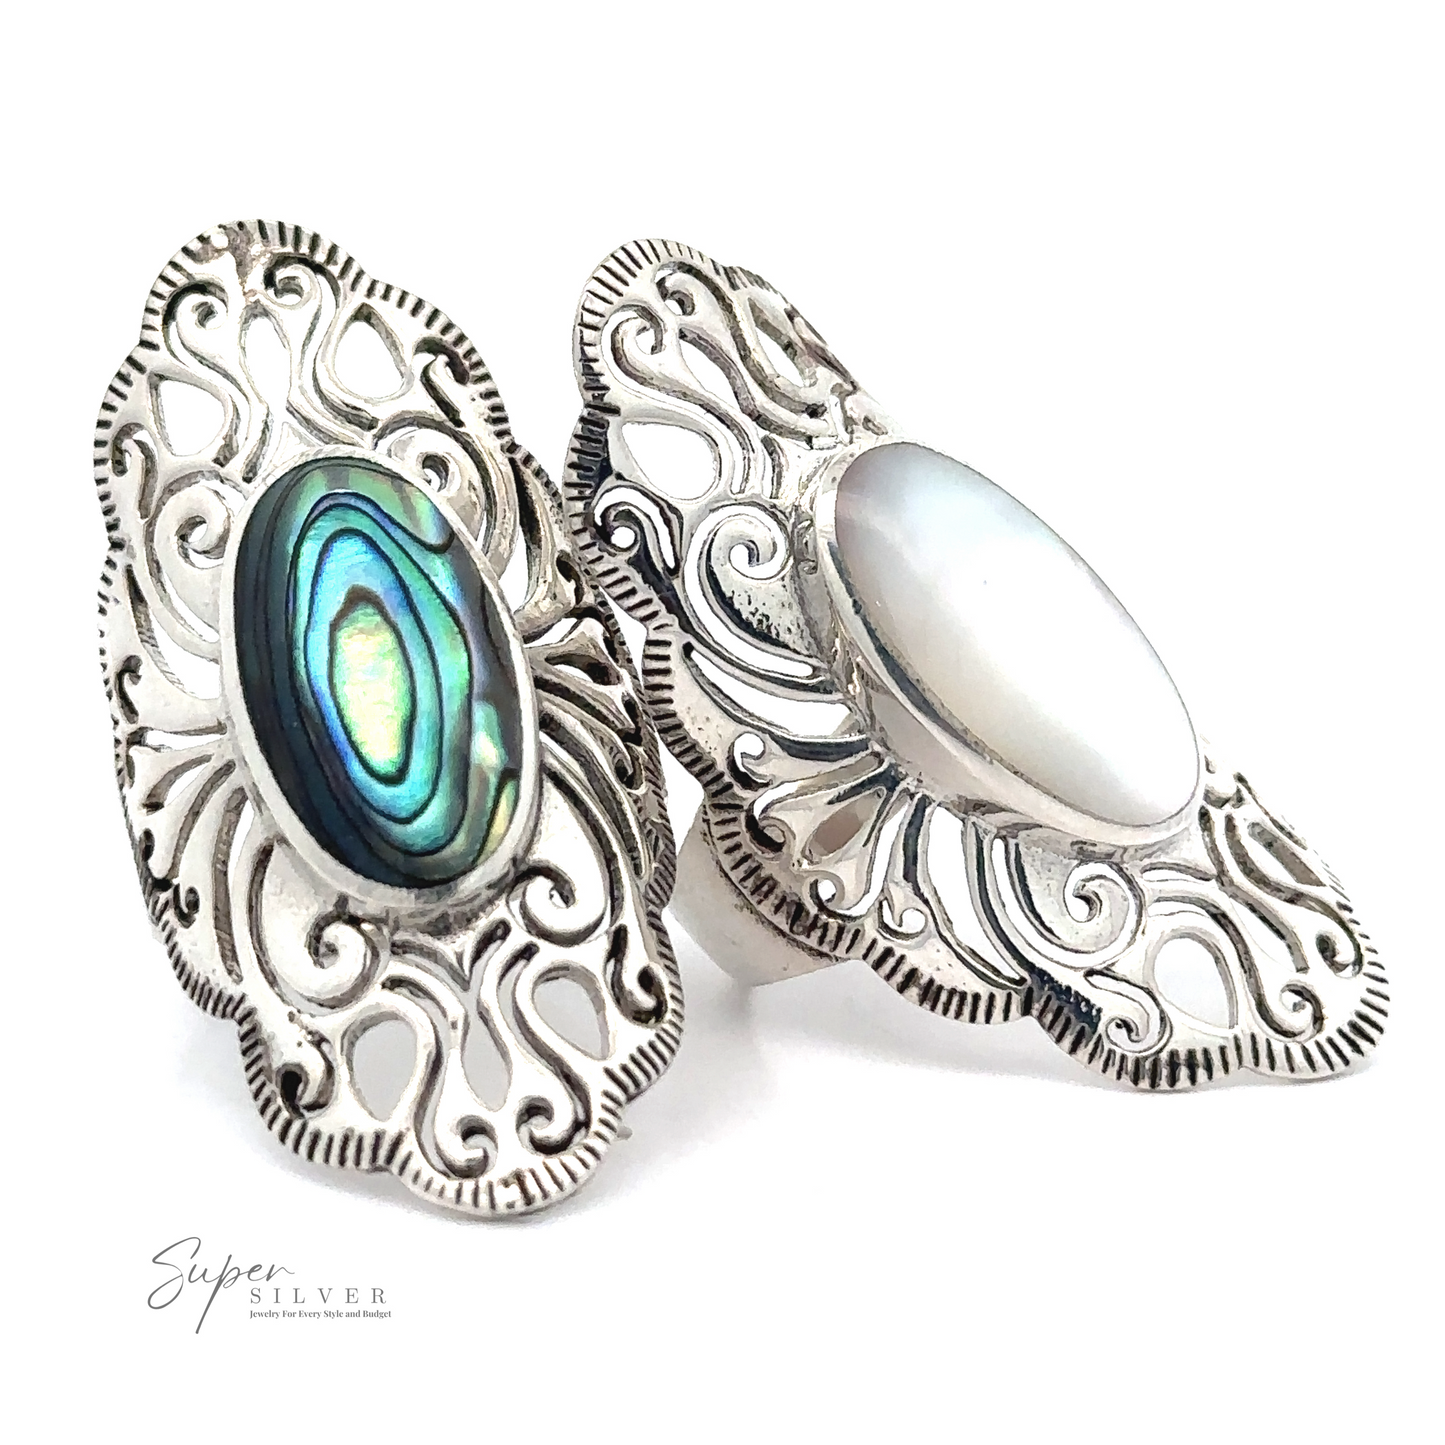 Two Long Vintage-Inspired Filigree Rings With Inlaid Stone exude vintage charm. One features an iridescent abalone shell, while the other has an oval white stone, both offering standout jewelry pieces that captivate the eye.